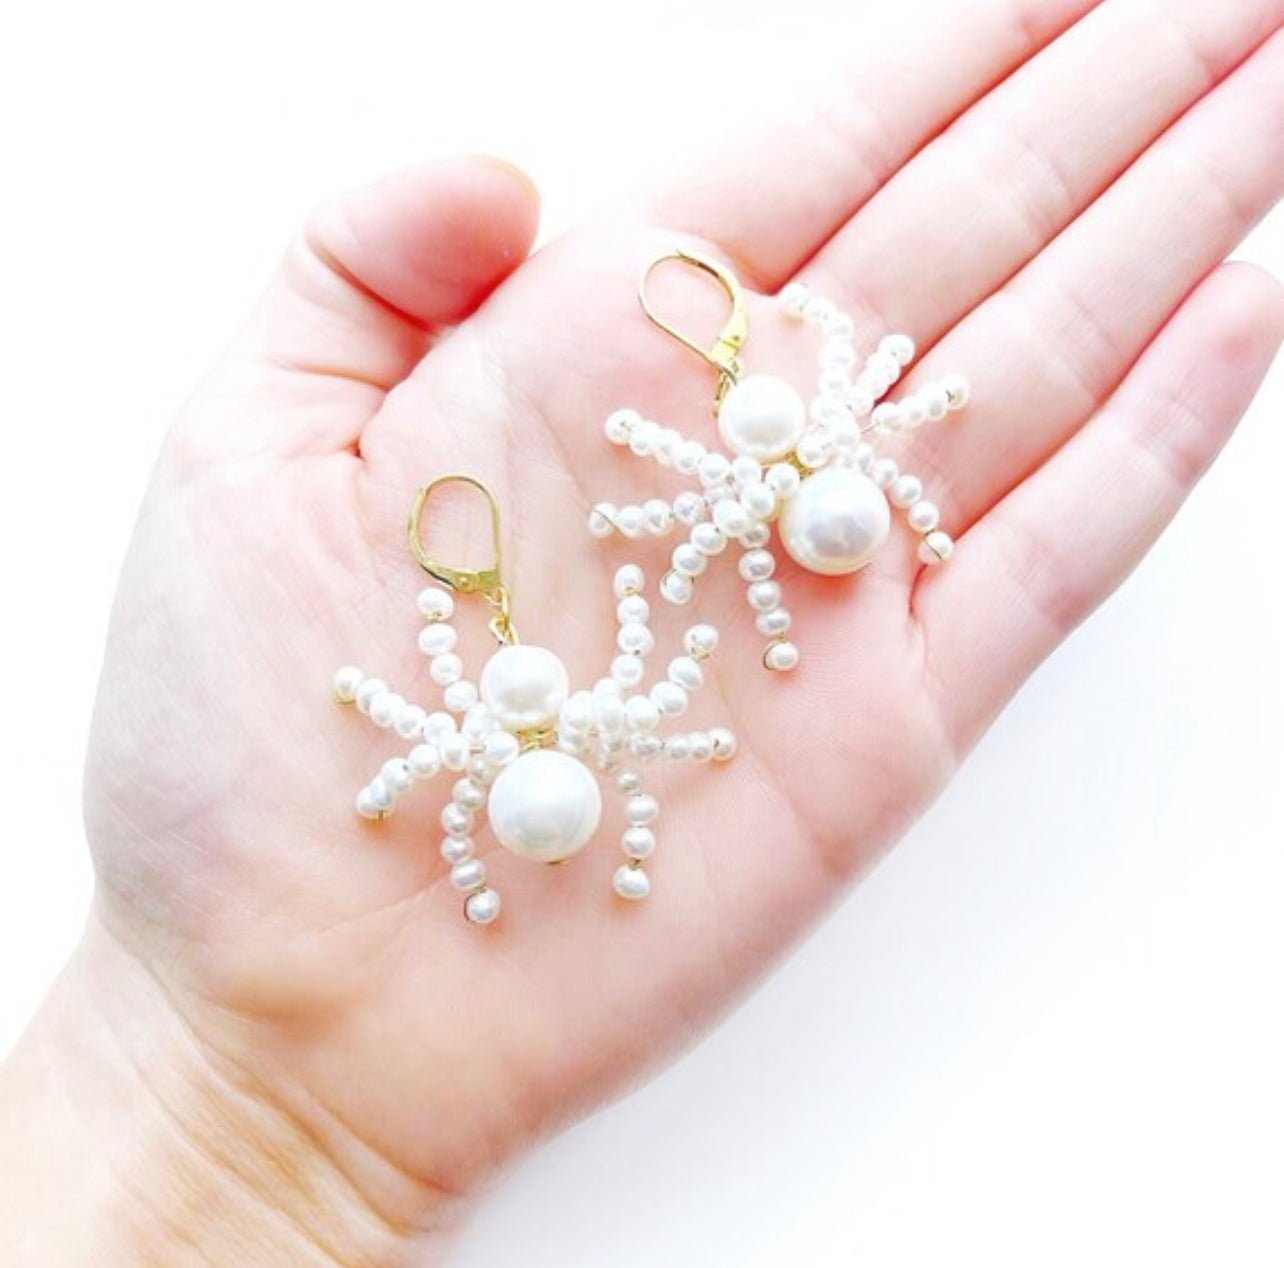 Spider statement earrings with white freshwater pearl, white pearl dangle earrings, punk goth earrings